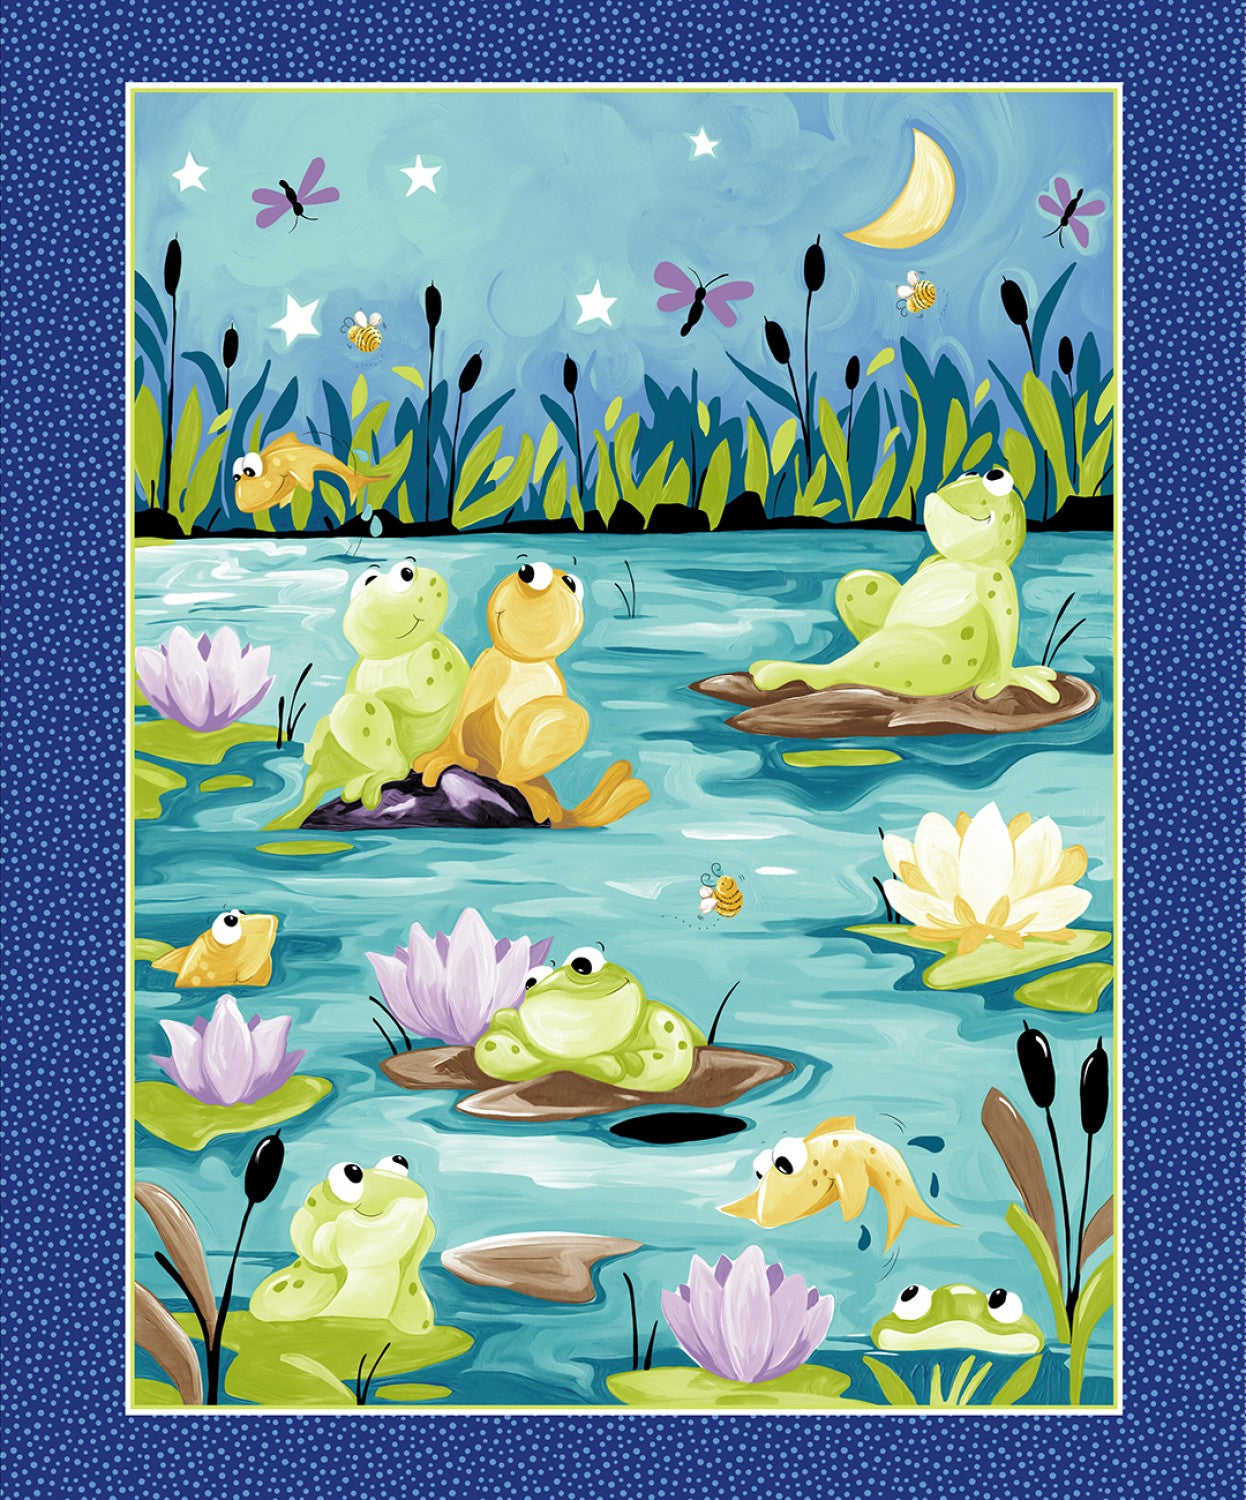 Paul's Pond | 36"x44" Quilt Panel by Susybee for Clothworks